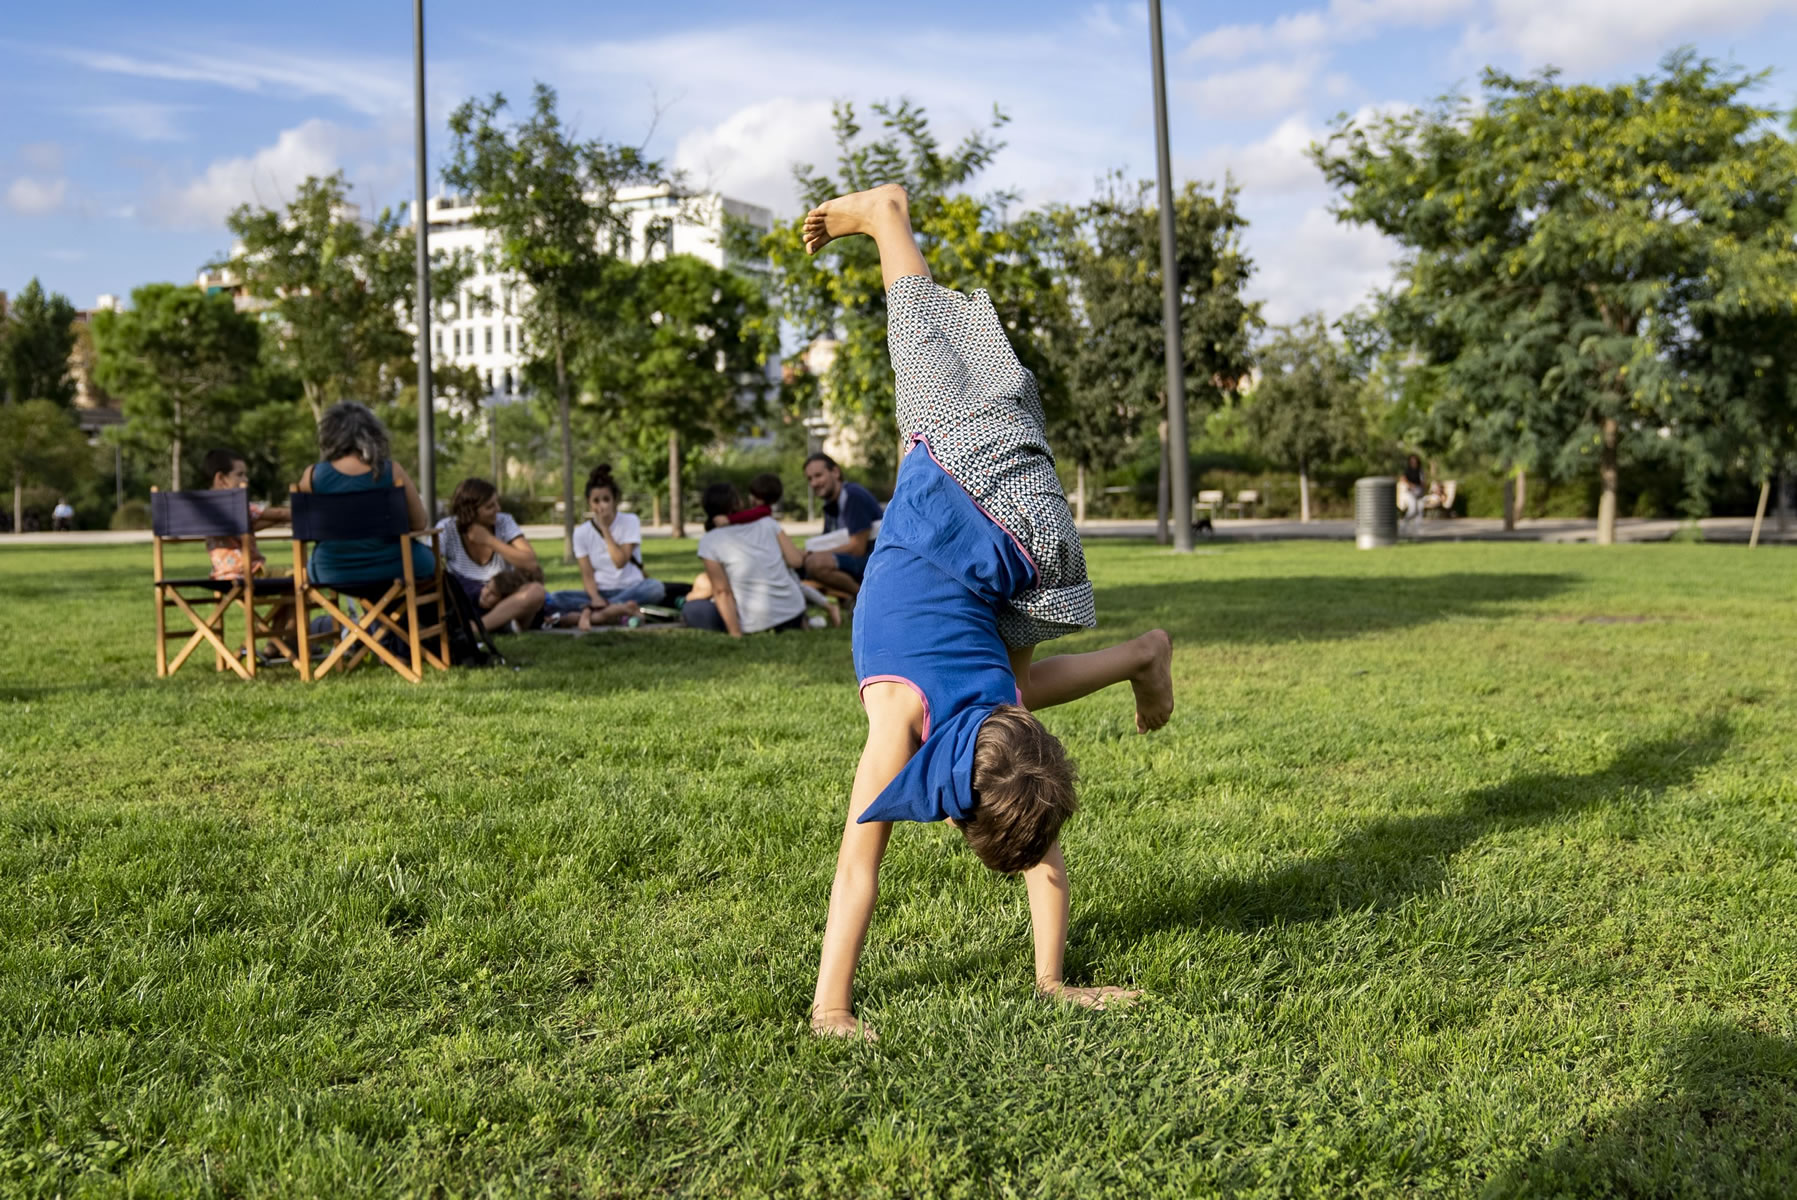 Girl doing a somersault on the grass in a park surrounded by vegetation